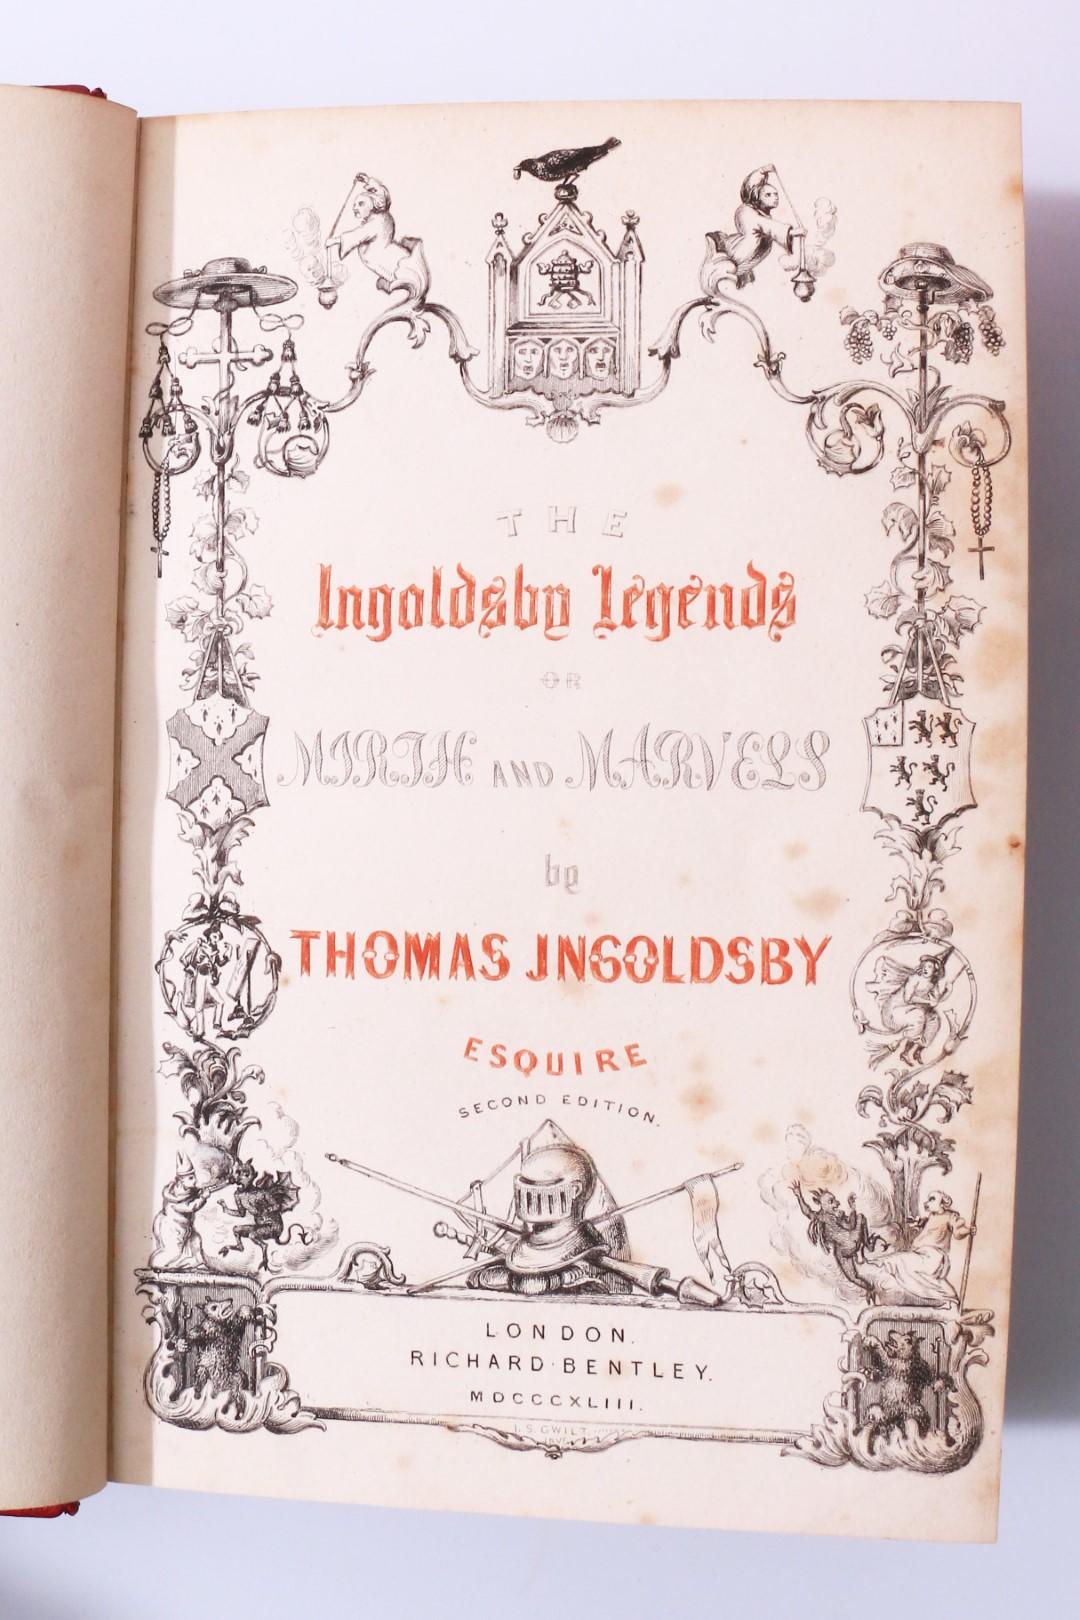 Thomas Ingoldsby - The Ingoldsby Legends of Mirth and Mervels - Richard Bentley, 1843, Second Edition.